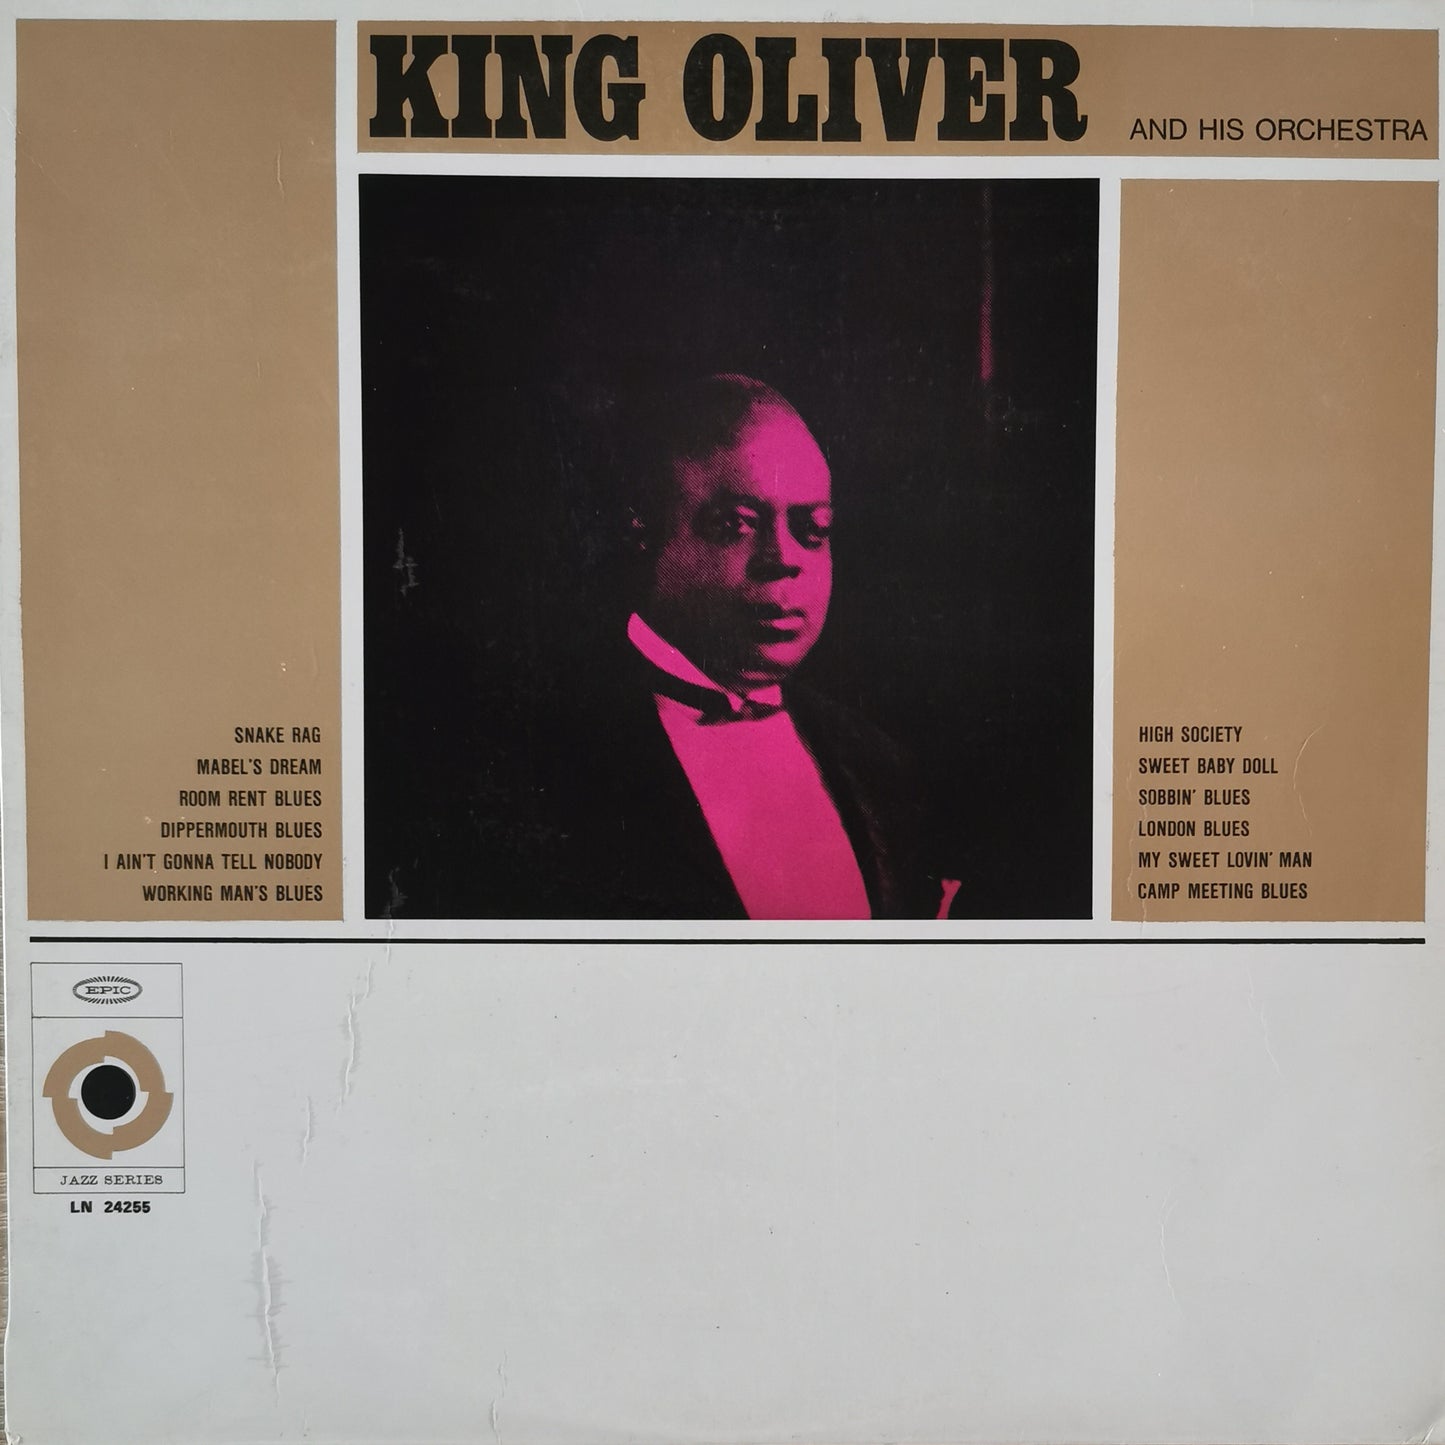 KING OLIVER AND HIS ORCHESTRA - King Oliver And His Orchestra